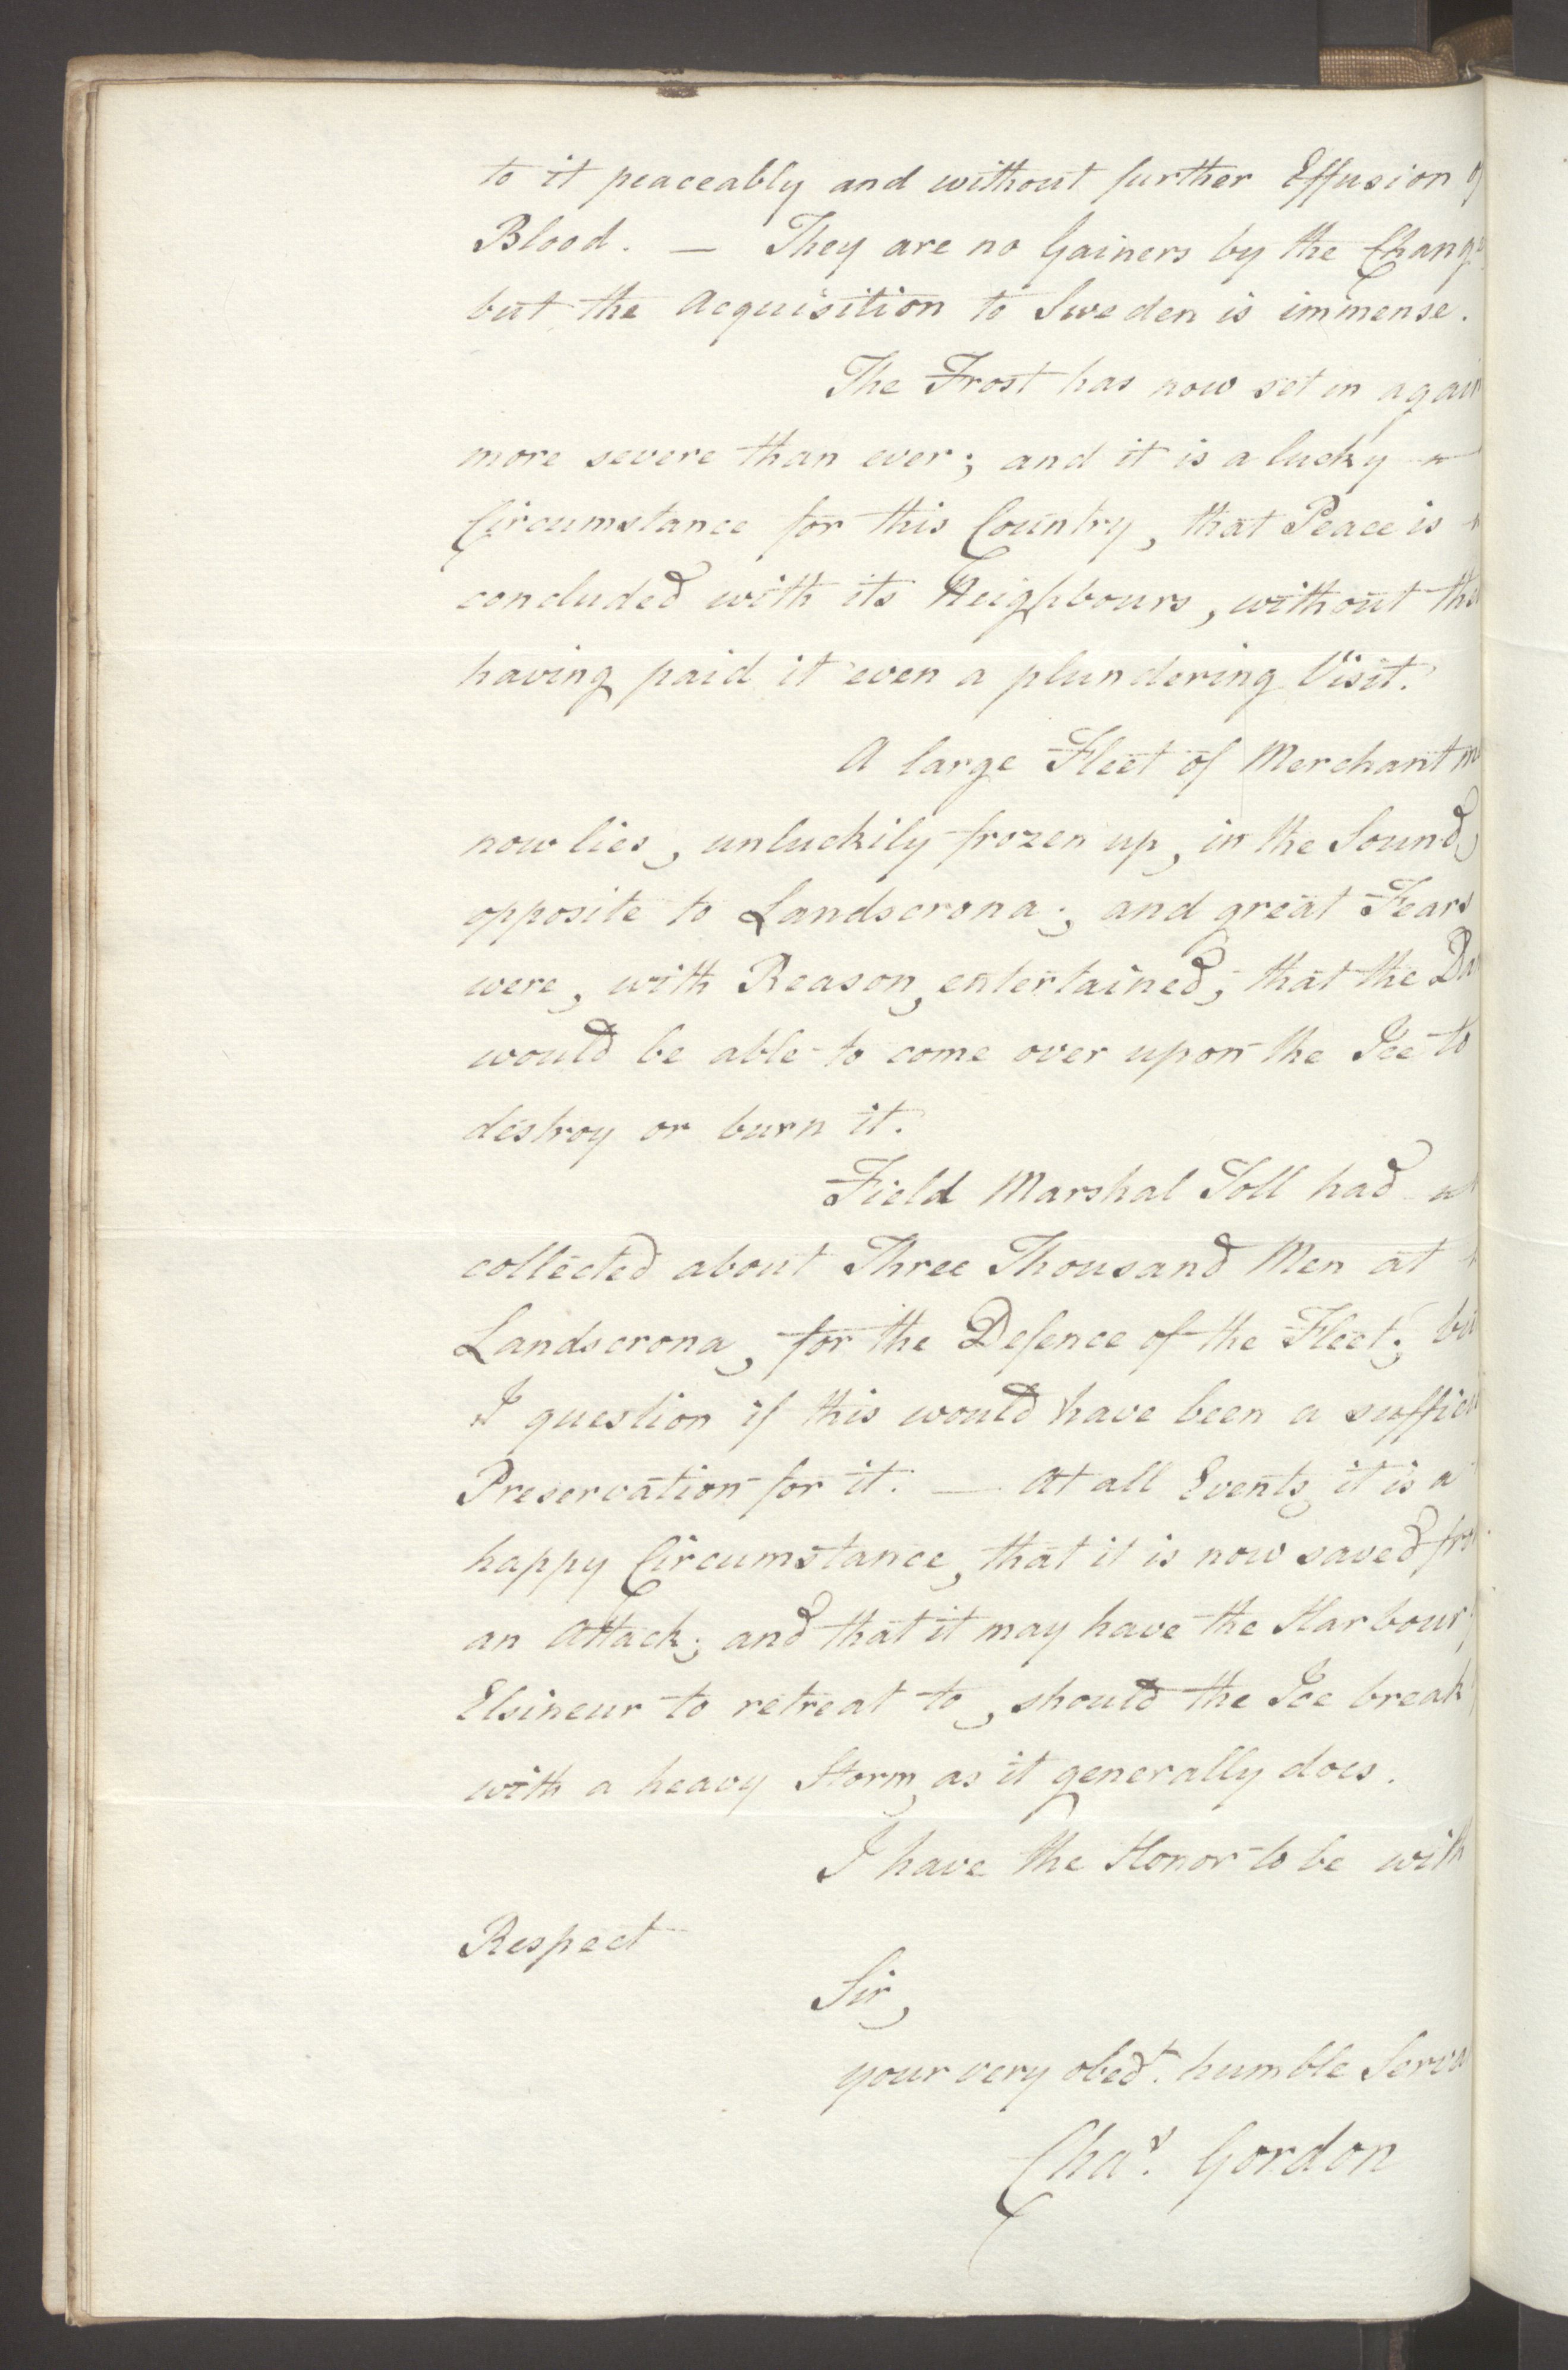 Foreign Office*, UKA/-/FO 38/16: Sir C. Gordon. Reports from Malmö, Jonkoping, and Helsingborg, 1814, s. 12